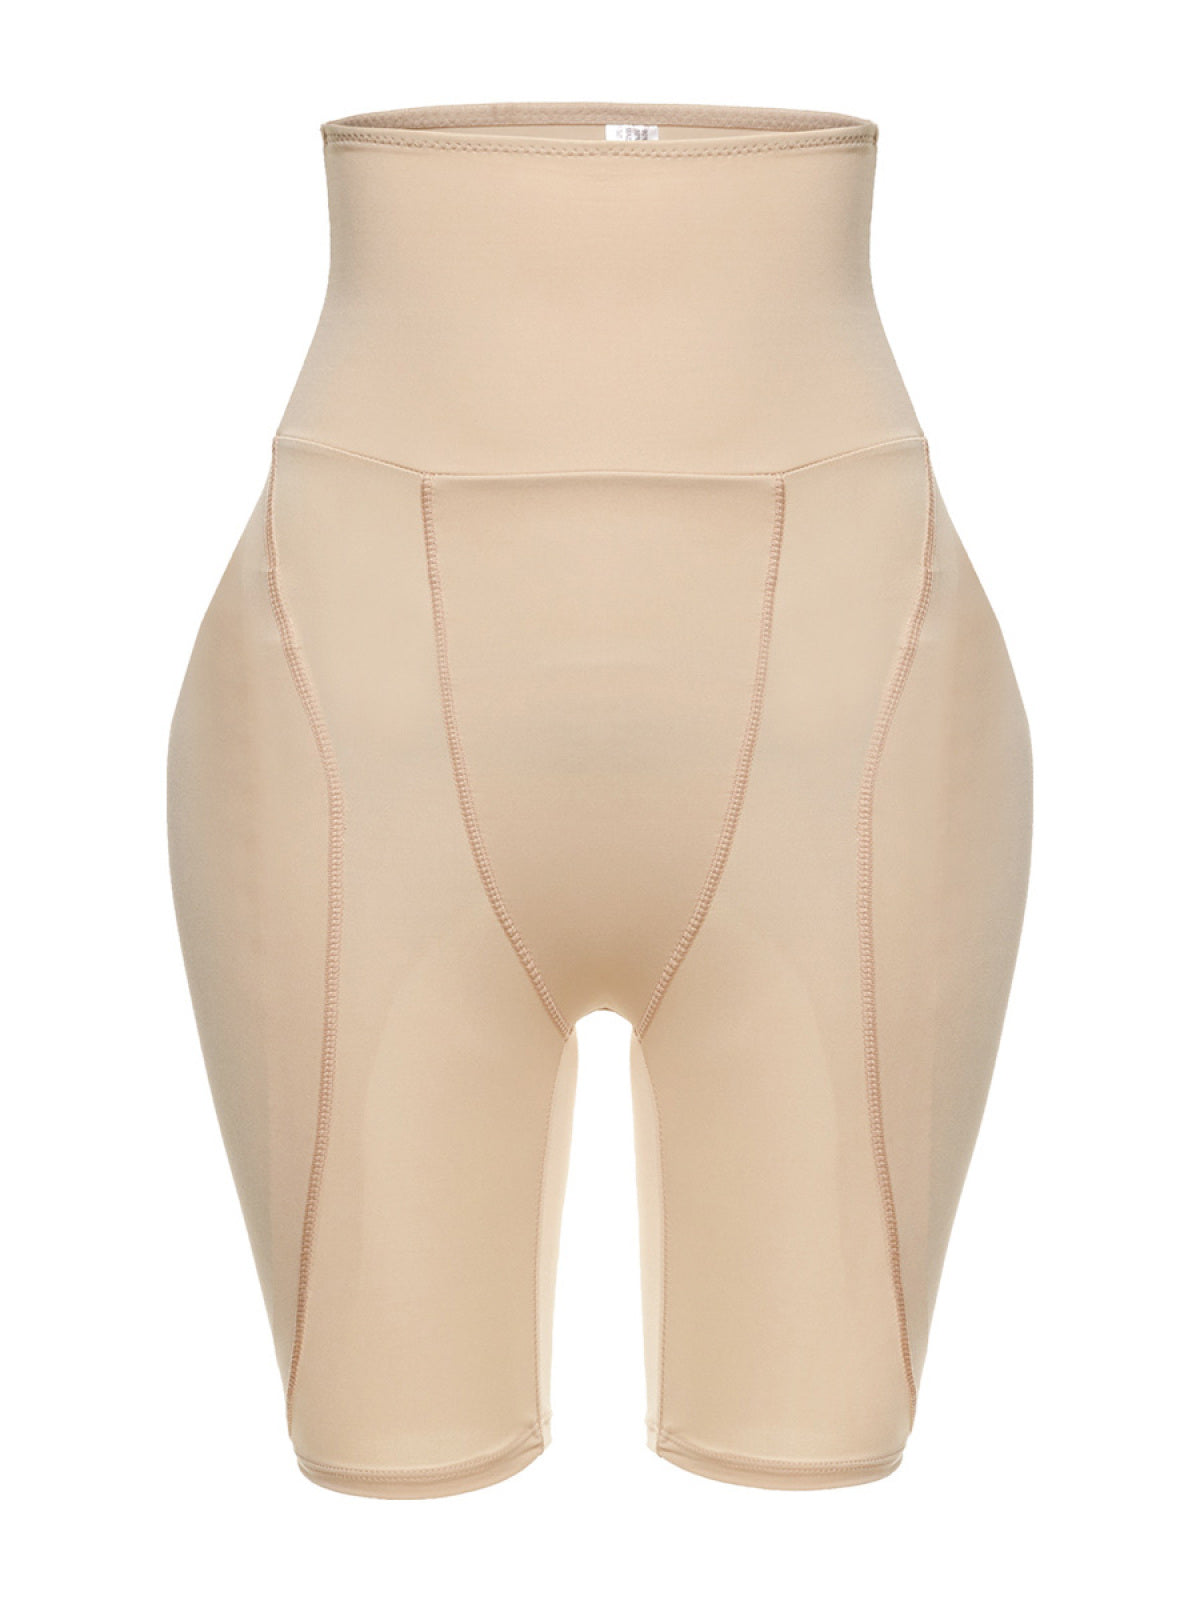 Plus Size Waist Shaping Butt Lifter With Pad | Art in Aging